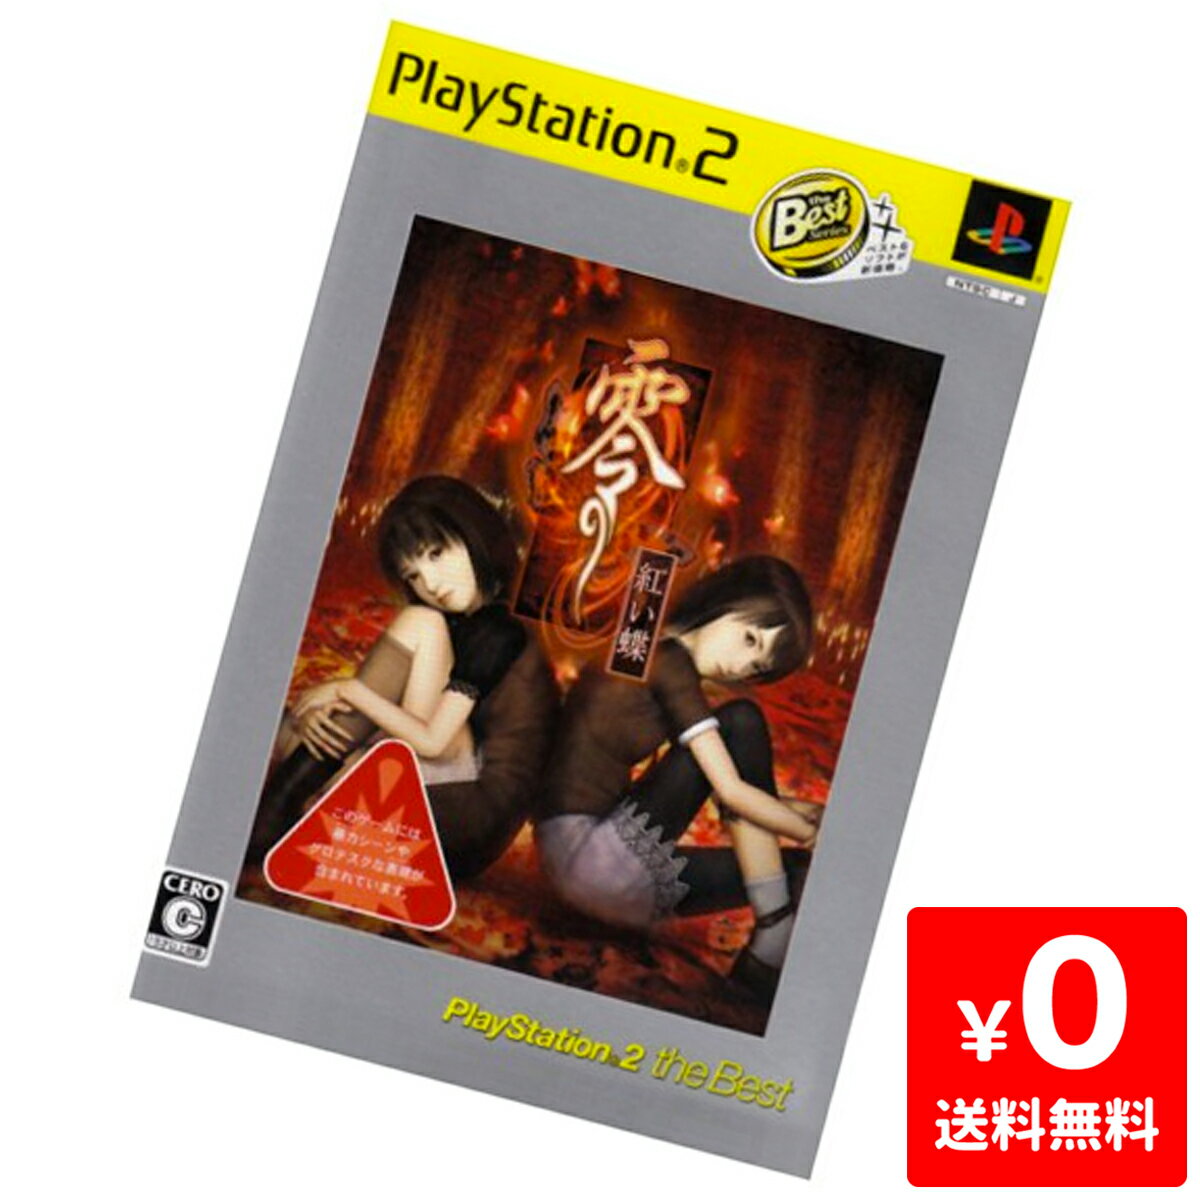 PS2 零~紅い蝶~ PlayStation 2 the Best プレステ2 PlayStation2 ソフト 4960677800364 【中古】